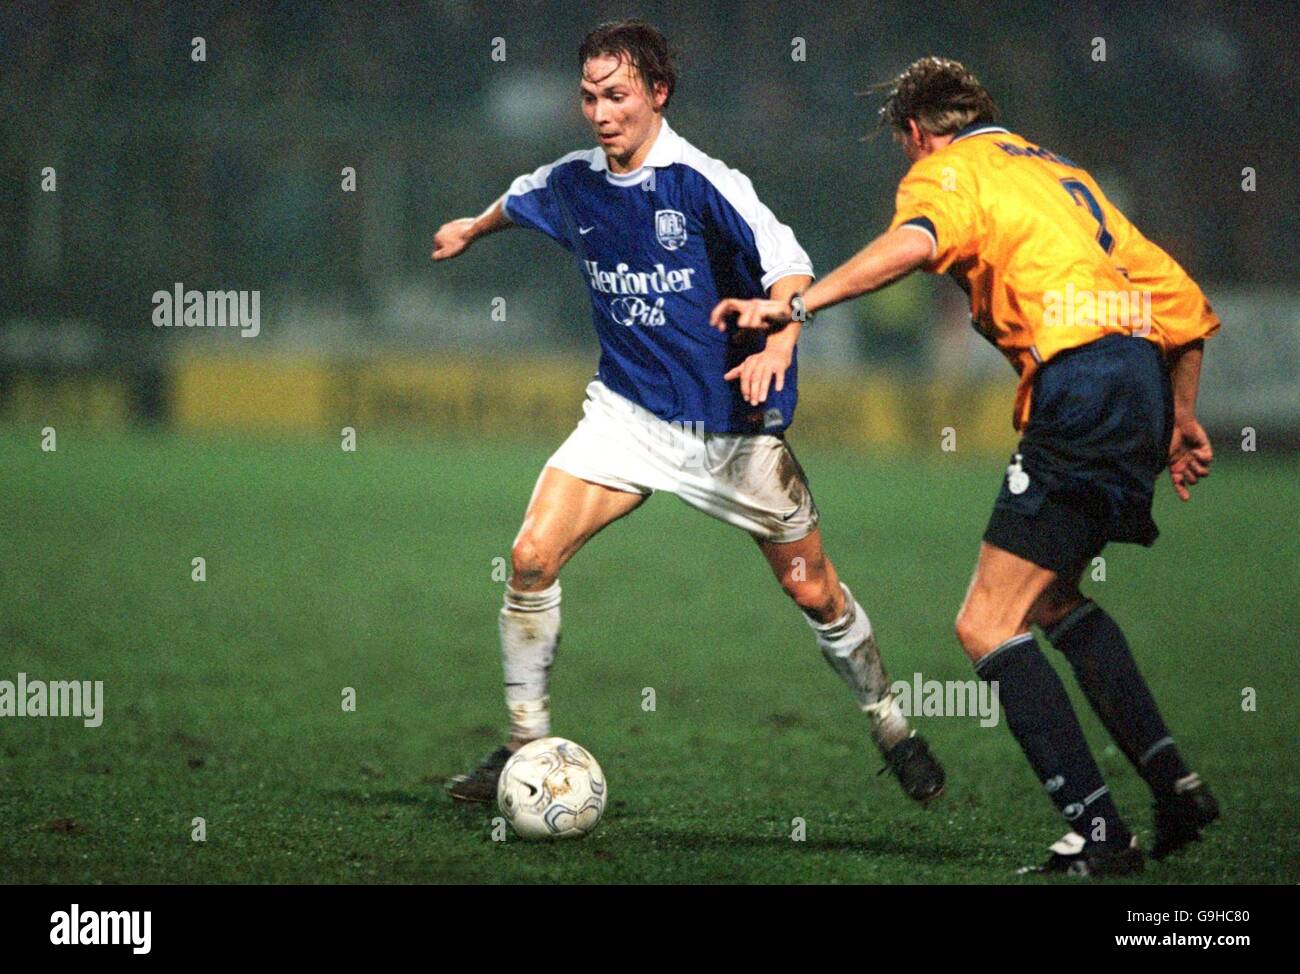 VfL Osnabruck's Dennis Weiland (l) takes on MSV Duisburg's Thomas Hoersen (r) Stock Photo